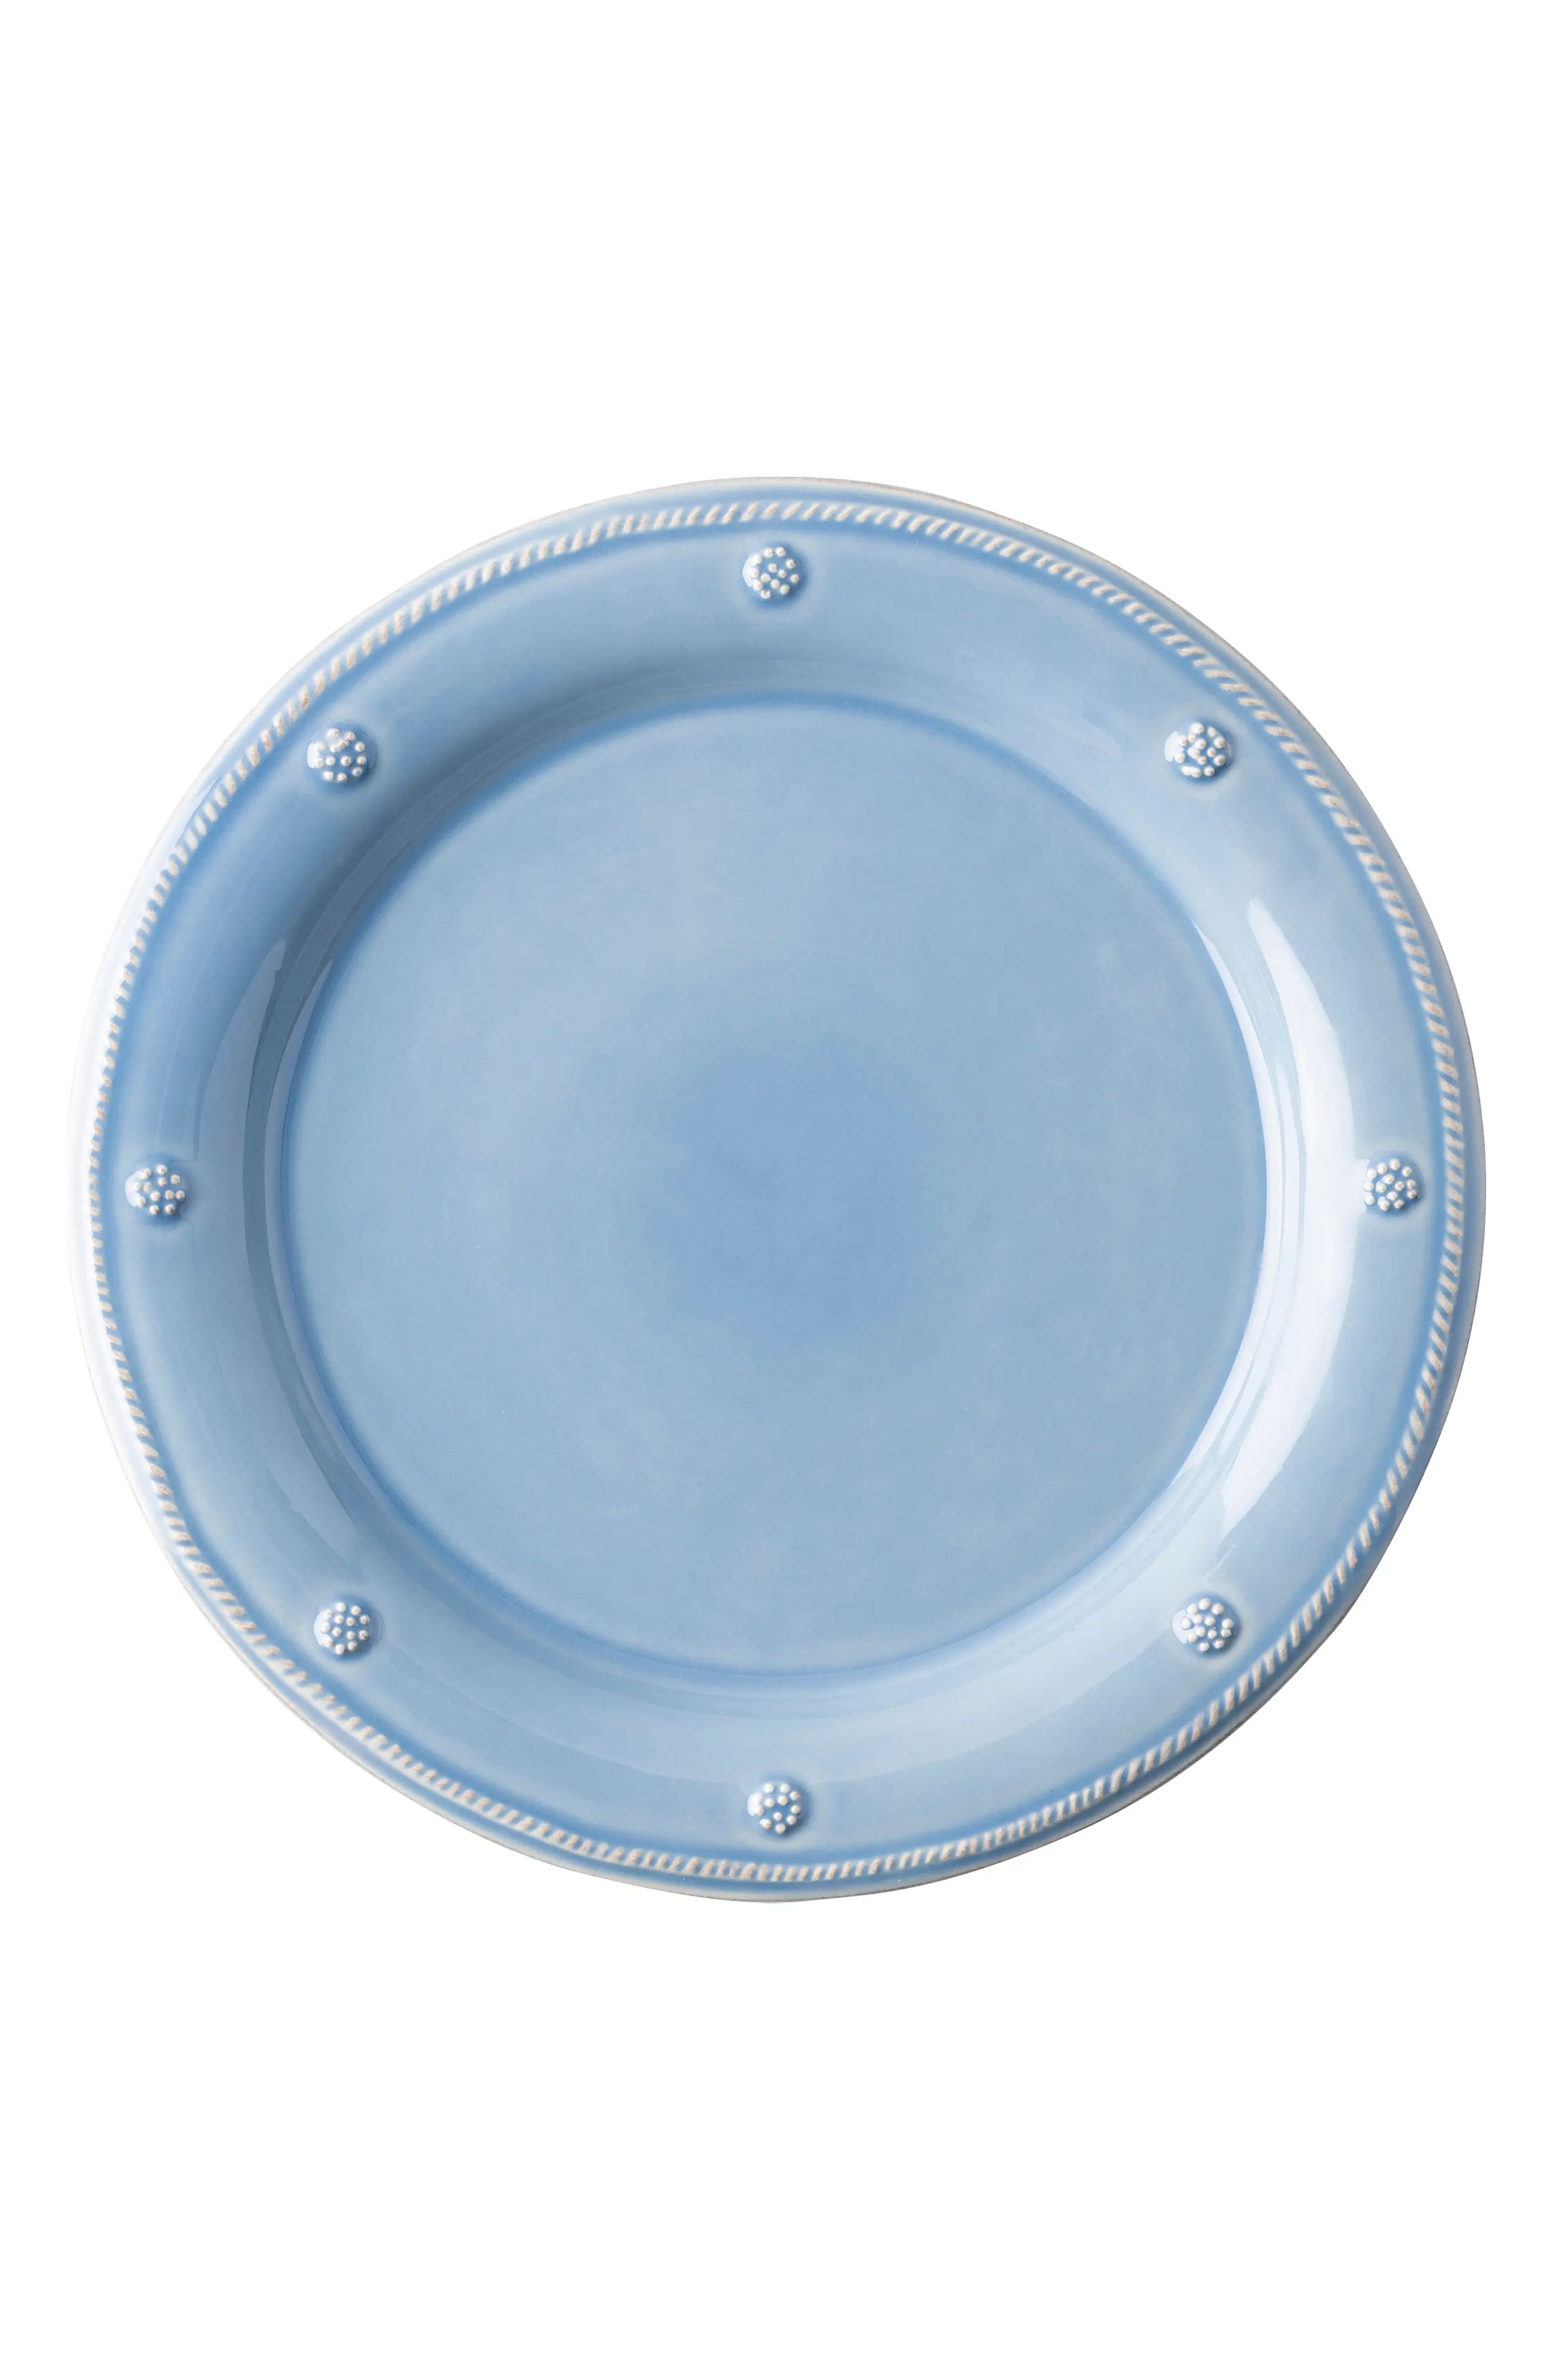 Juliska 'Berry And Thread' Dinner Plate, Size One Size - Blue | Nordstrom